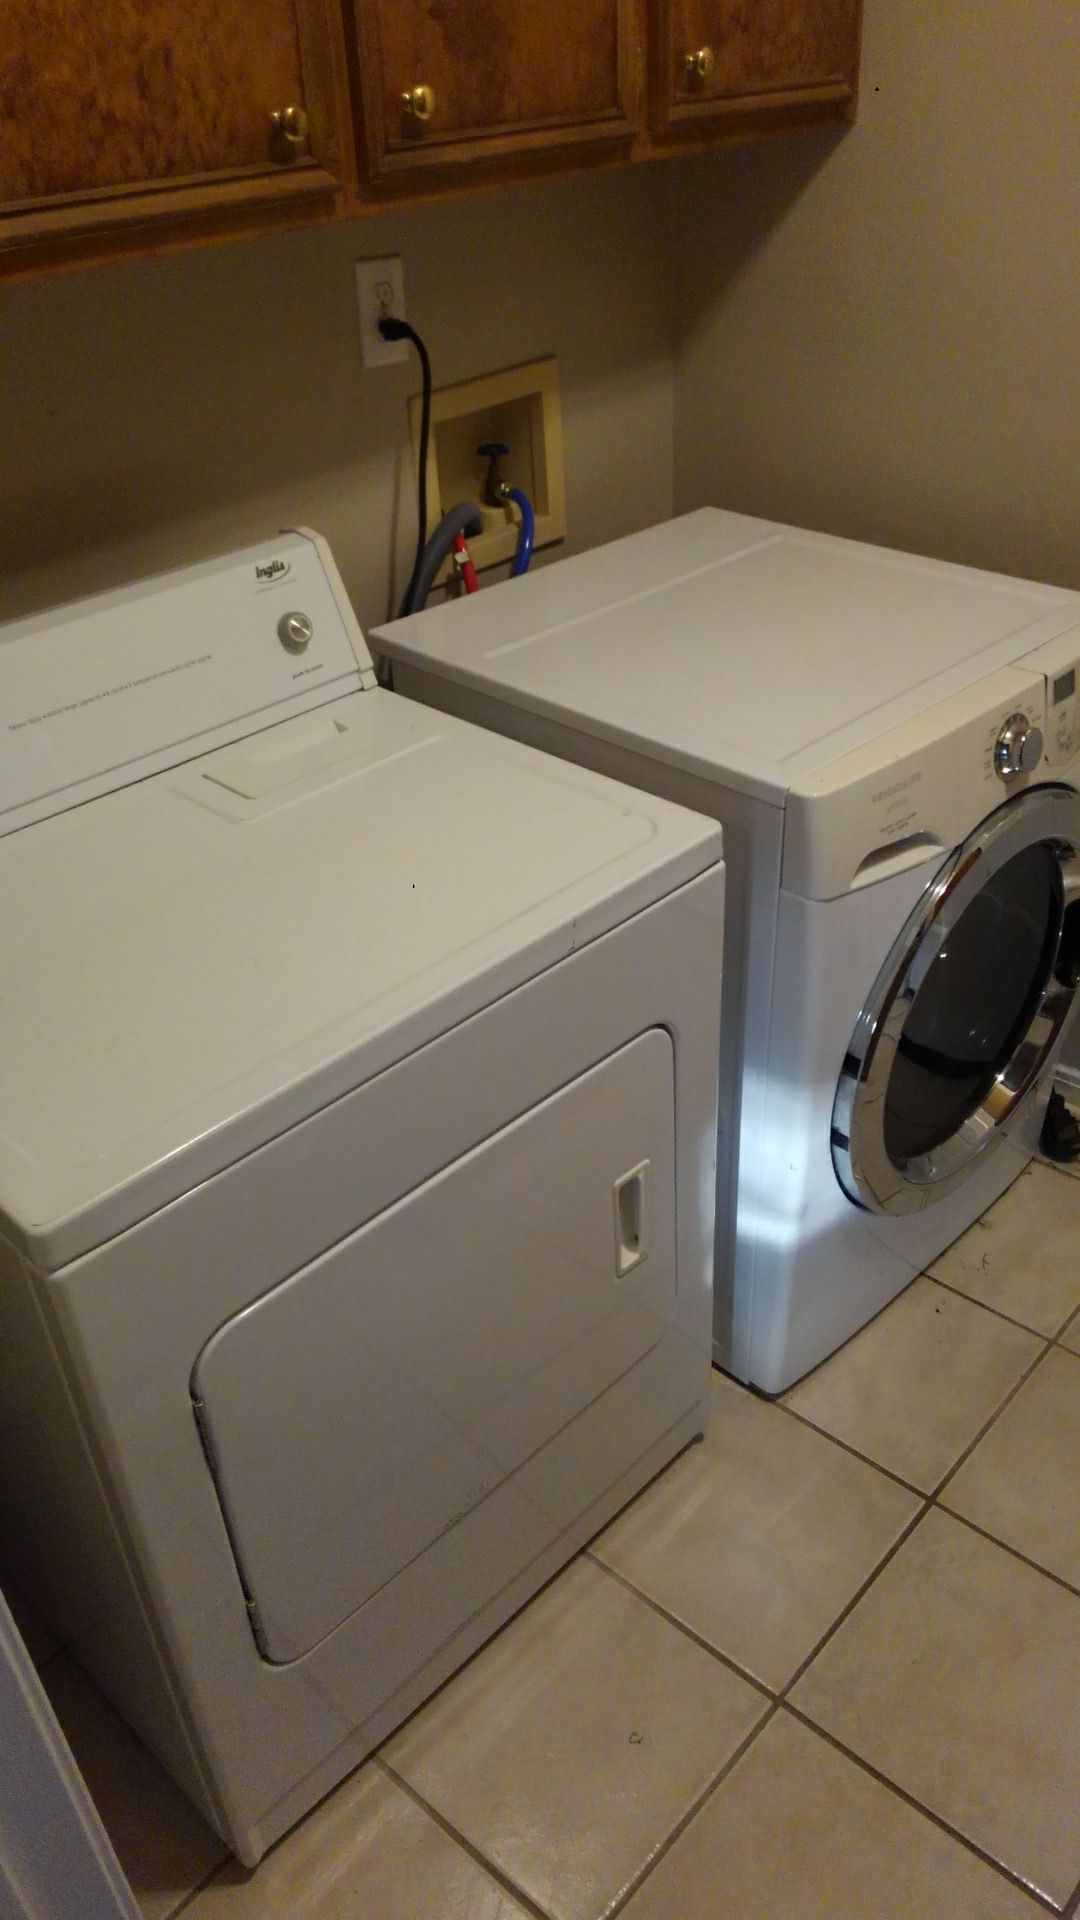 Inglis Whirlpool dryer and Frigidaire Affinity Washer